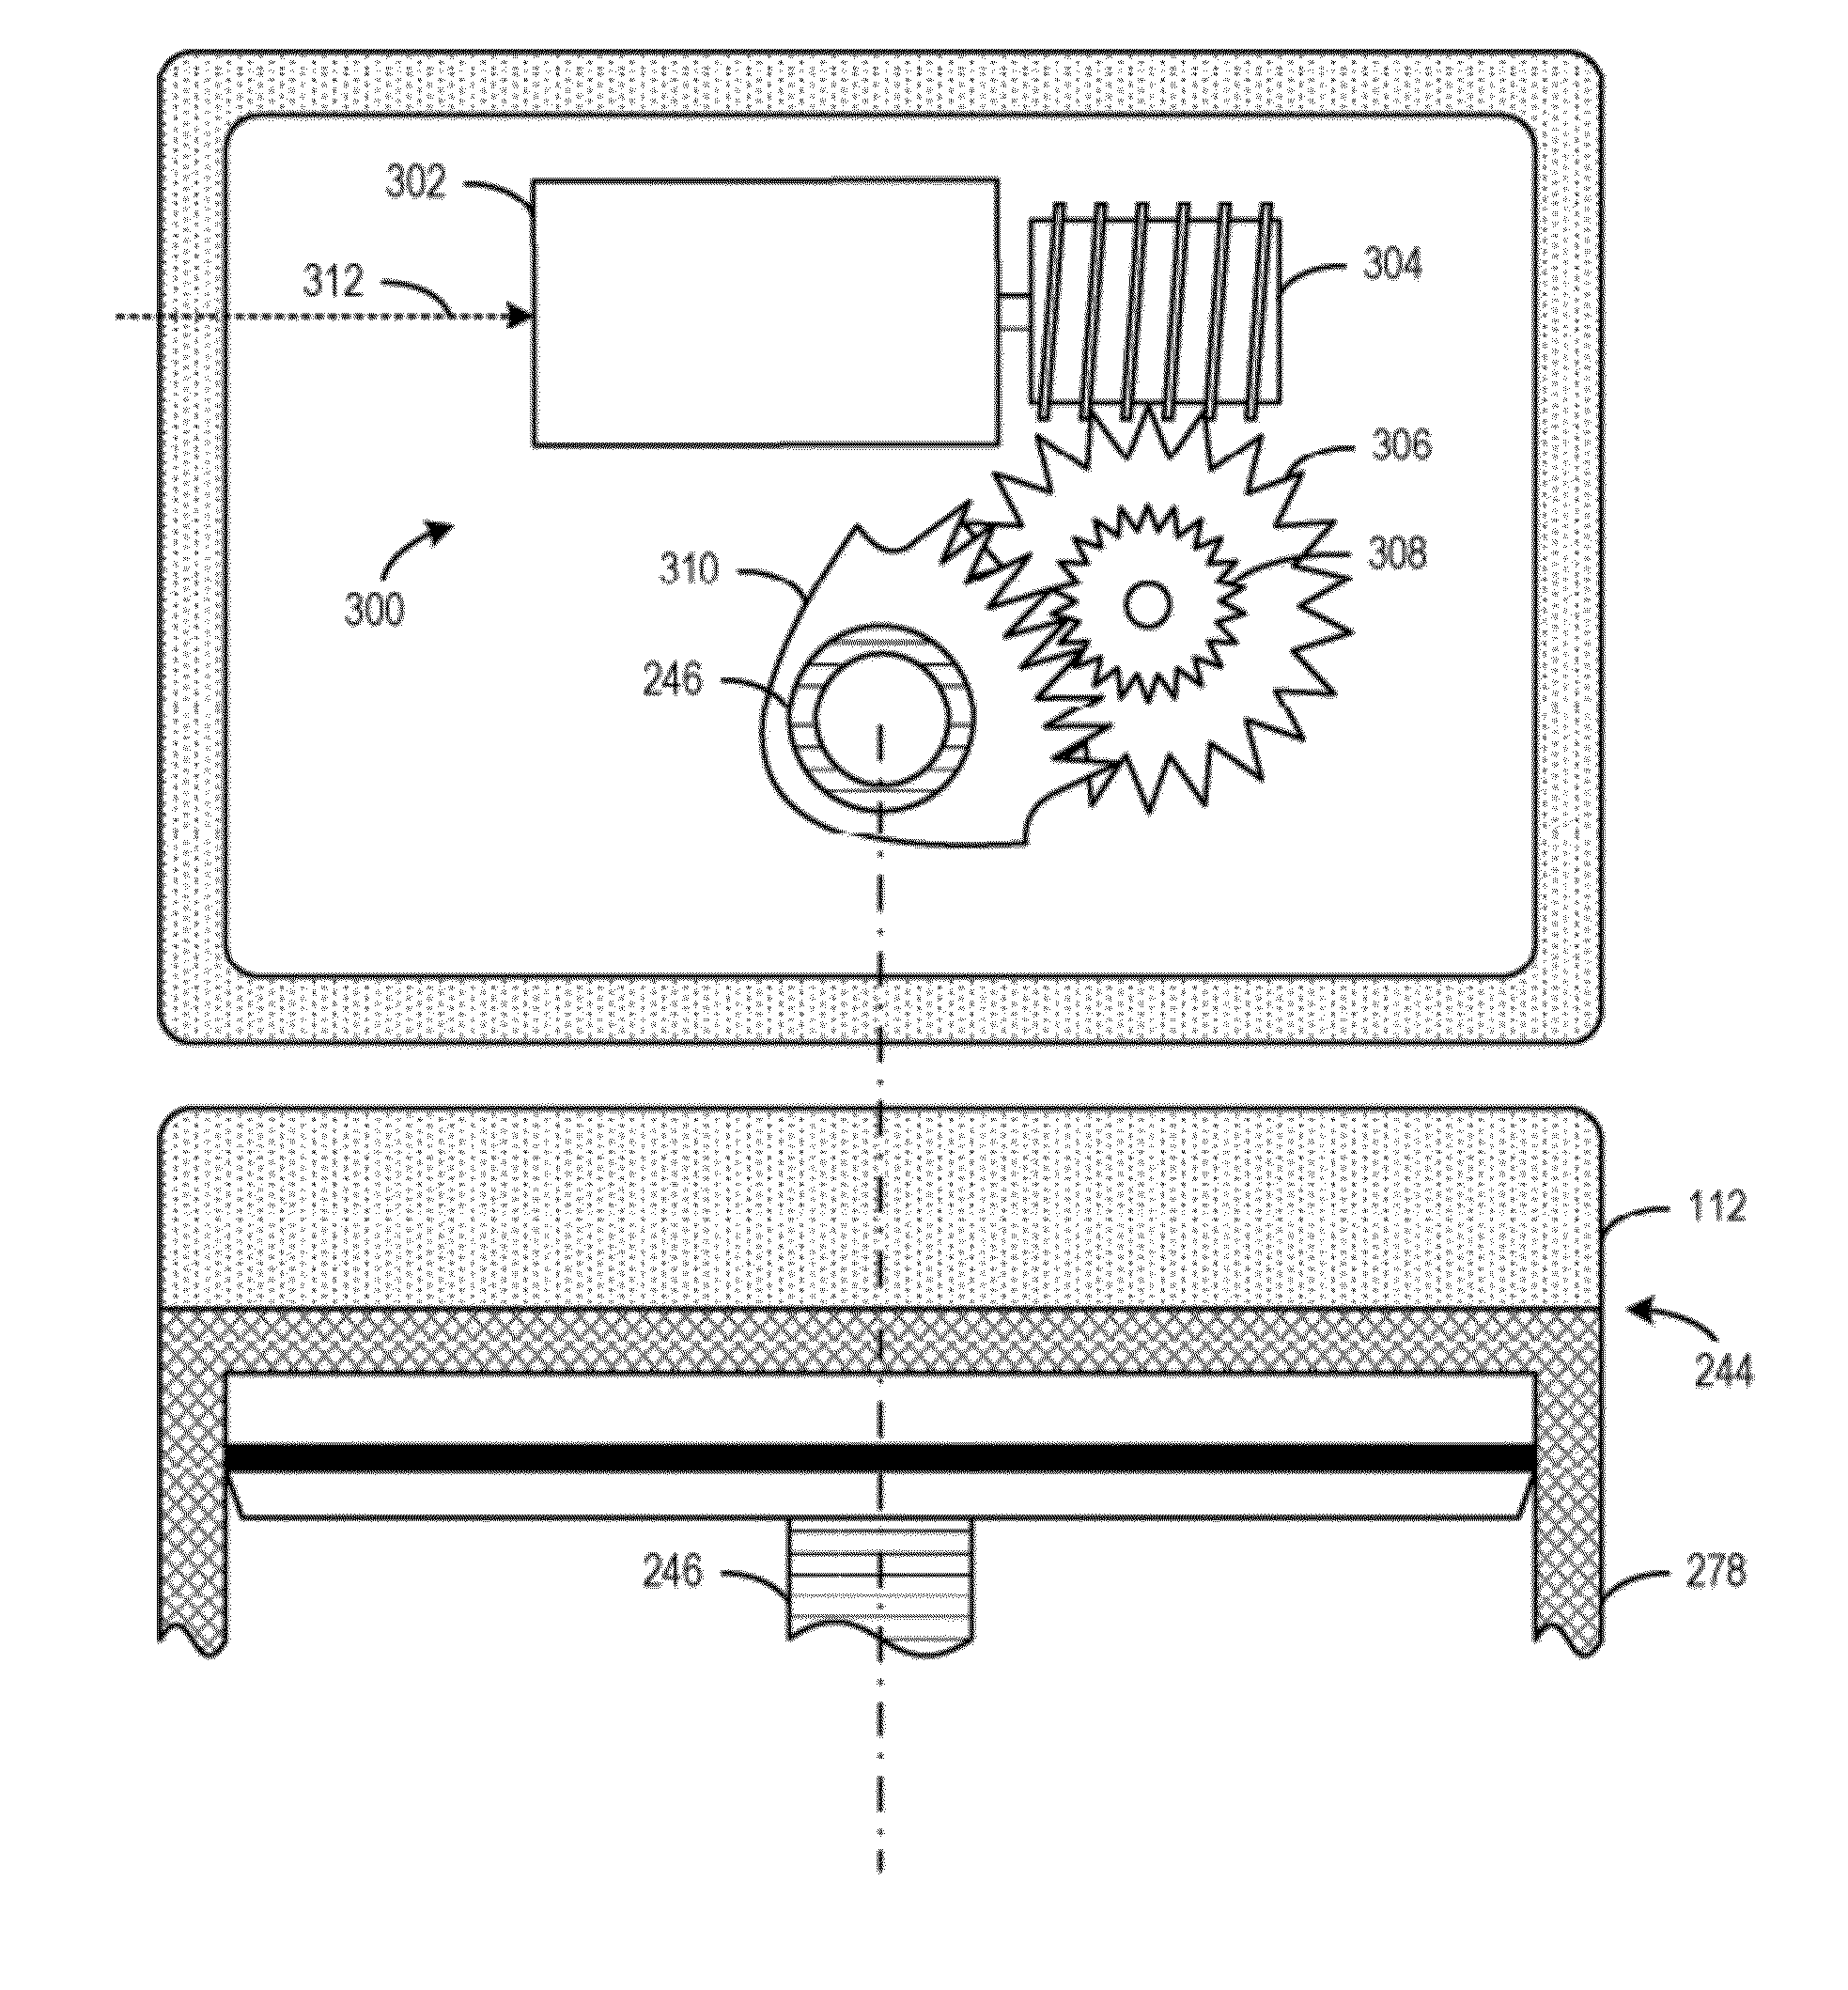 Fuel system with electrically-controllable mechanical pressure regulator